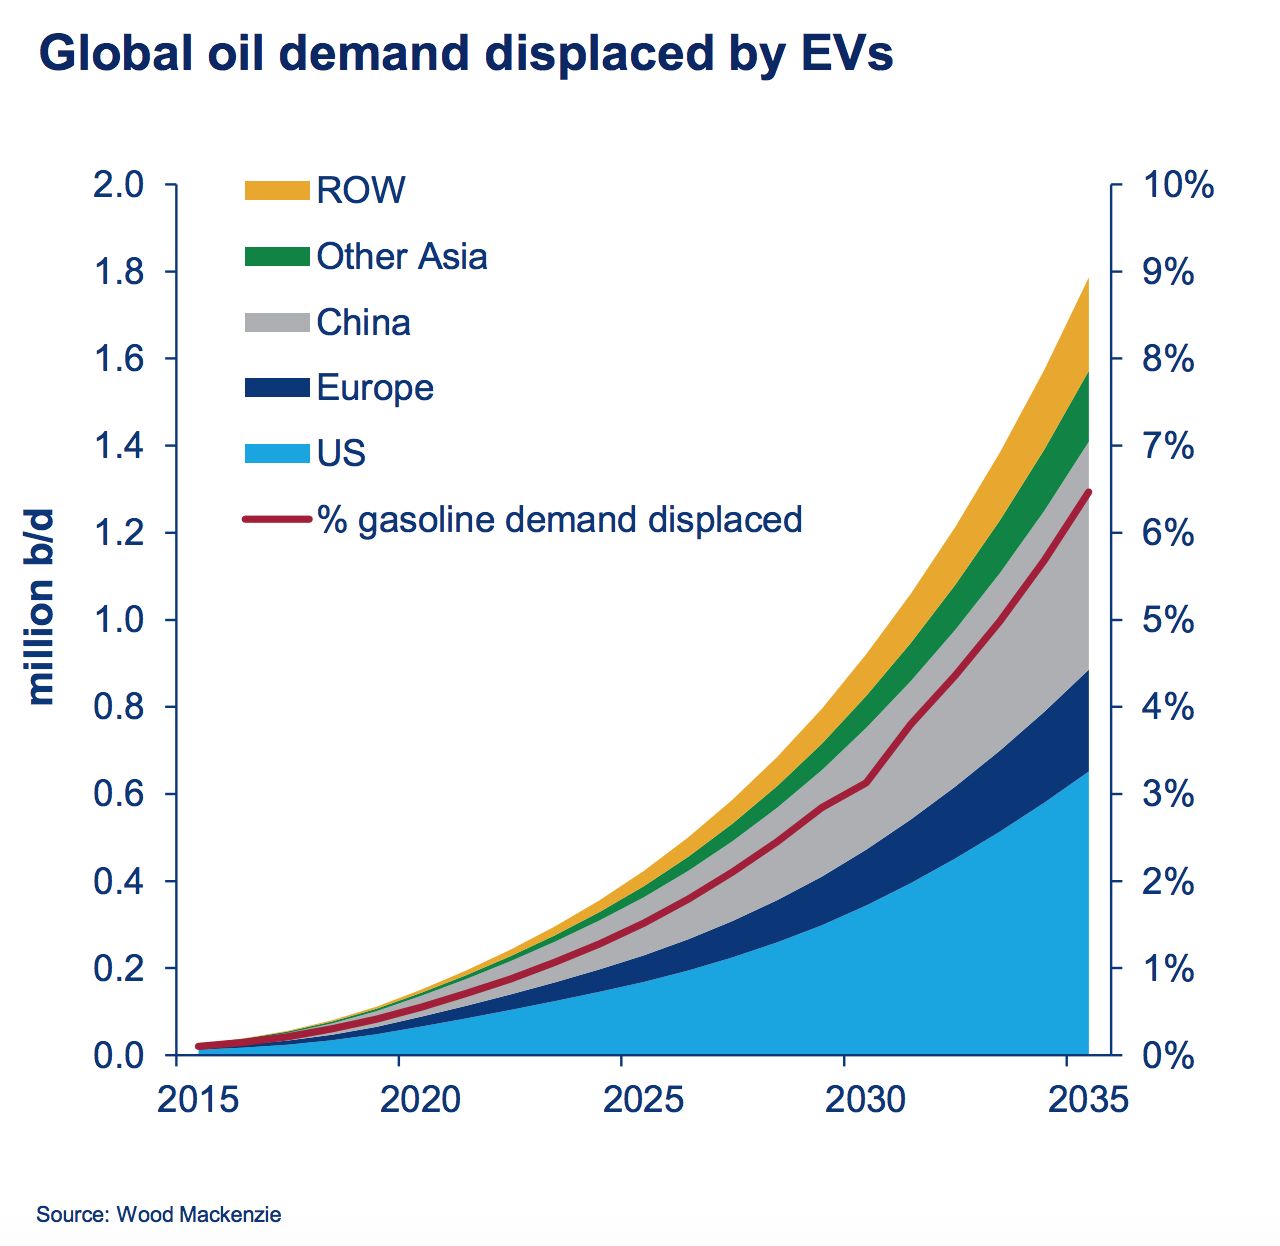 Under Paris agreement, electric cars will hurt oil demand well before